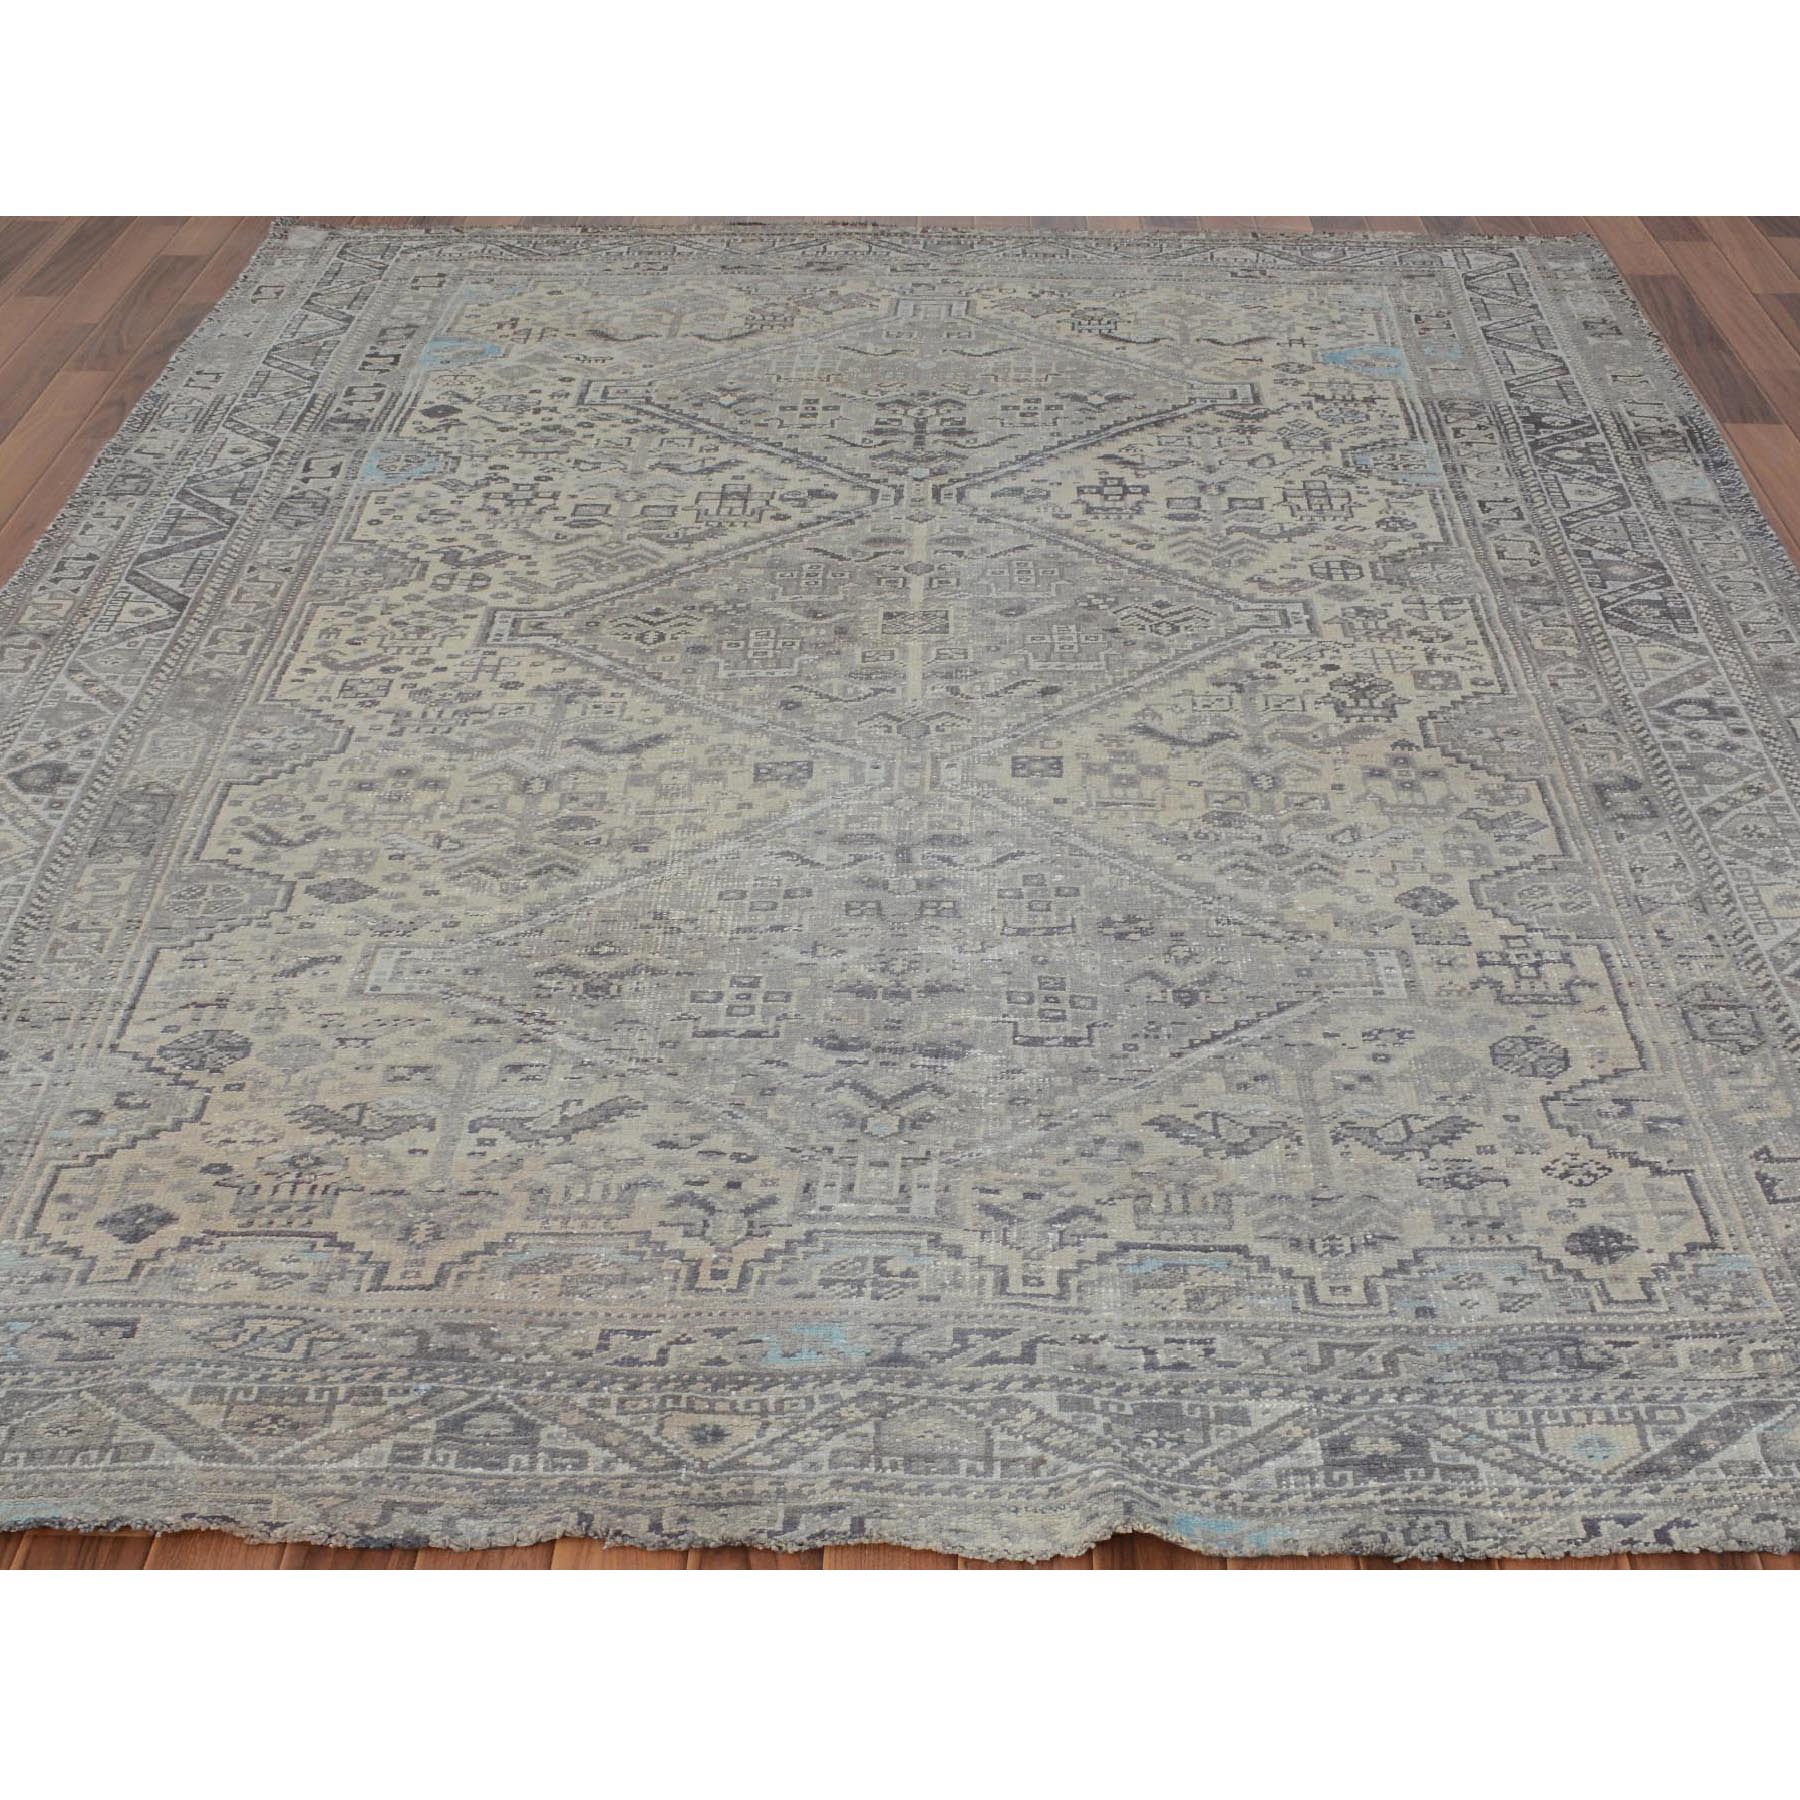 7-1 x9-7  Beige Vintage and Worn Down Persian Qashqai Pure Wool Hand Knotted Oriental Rug 